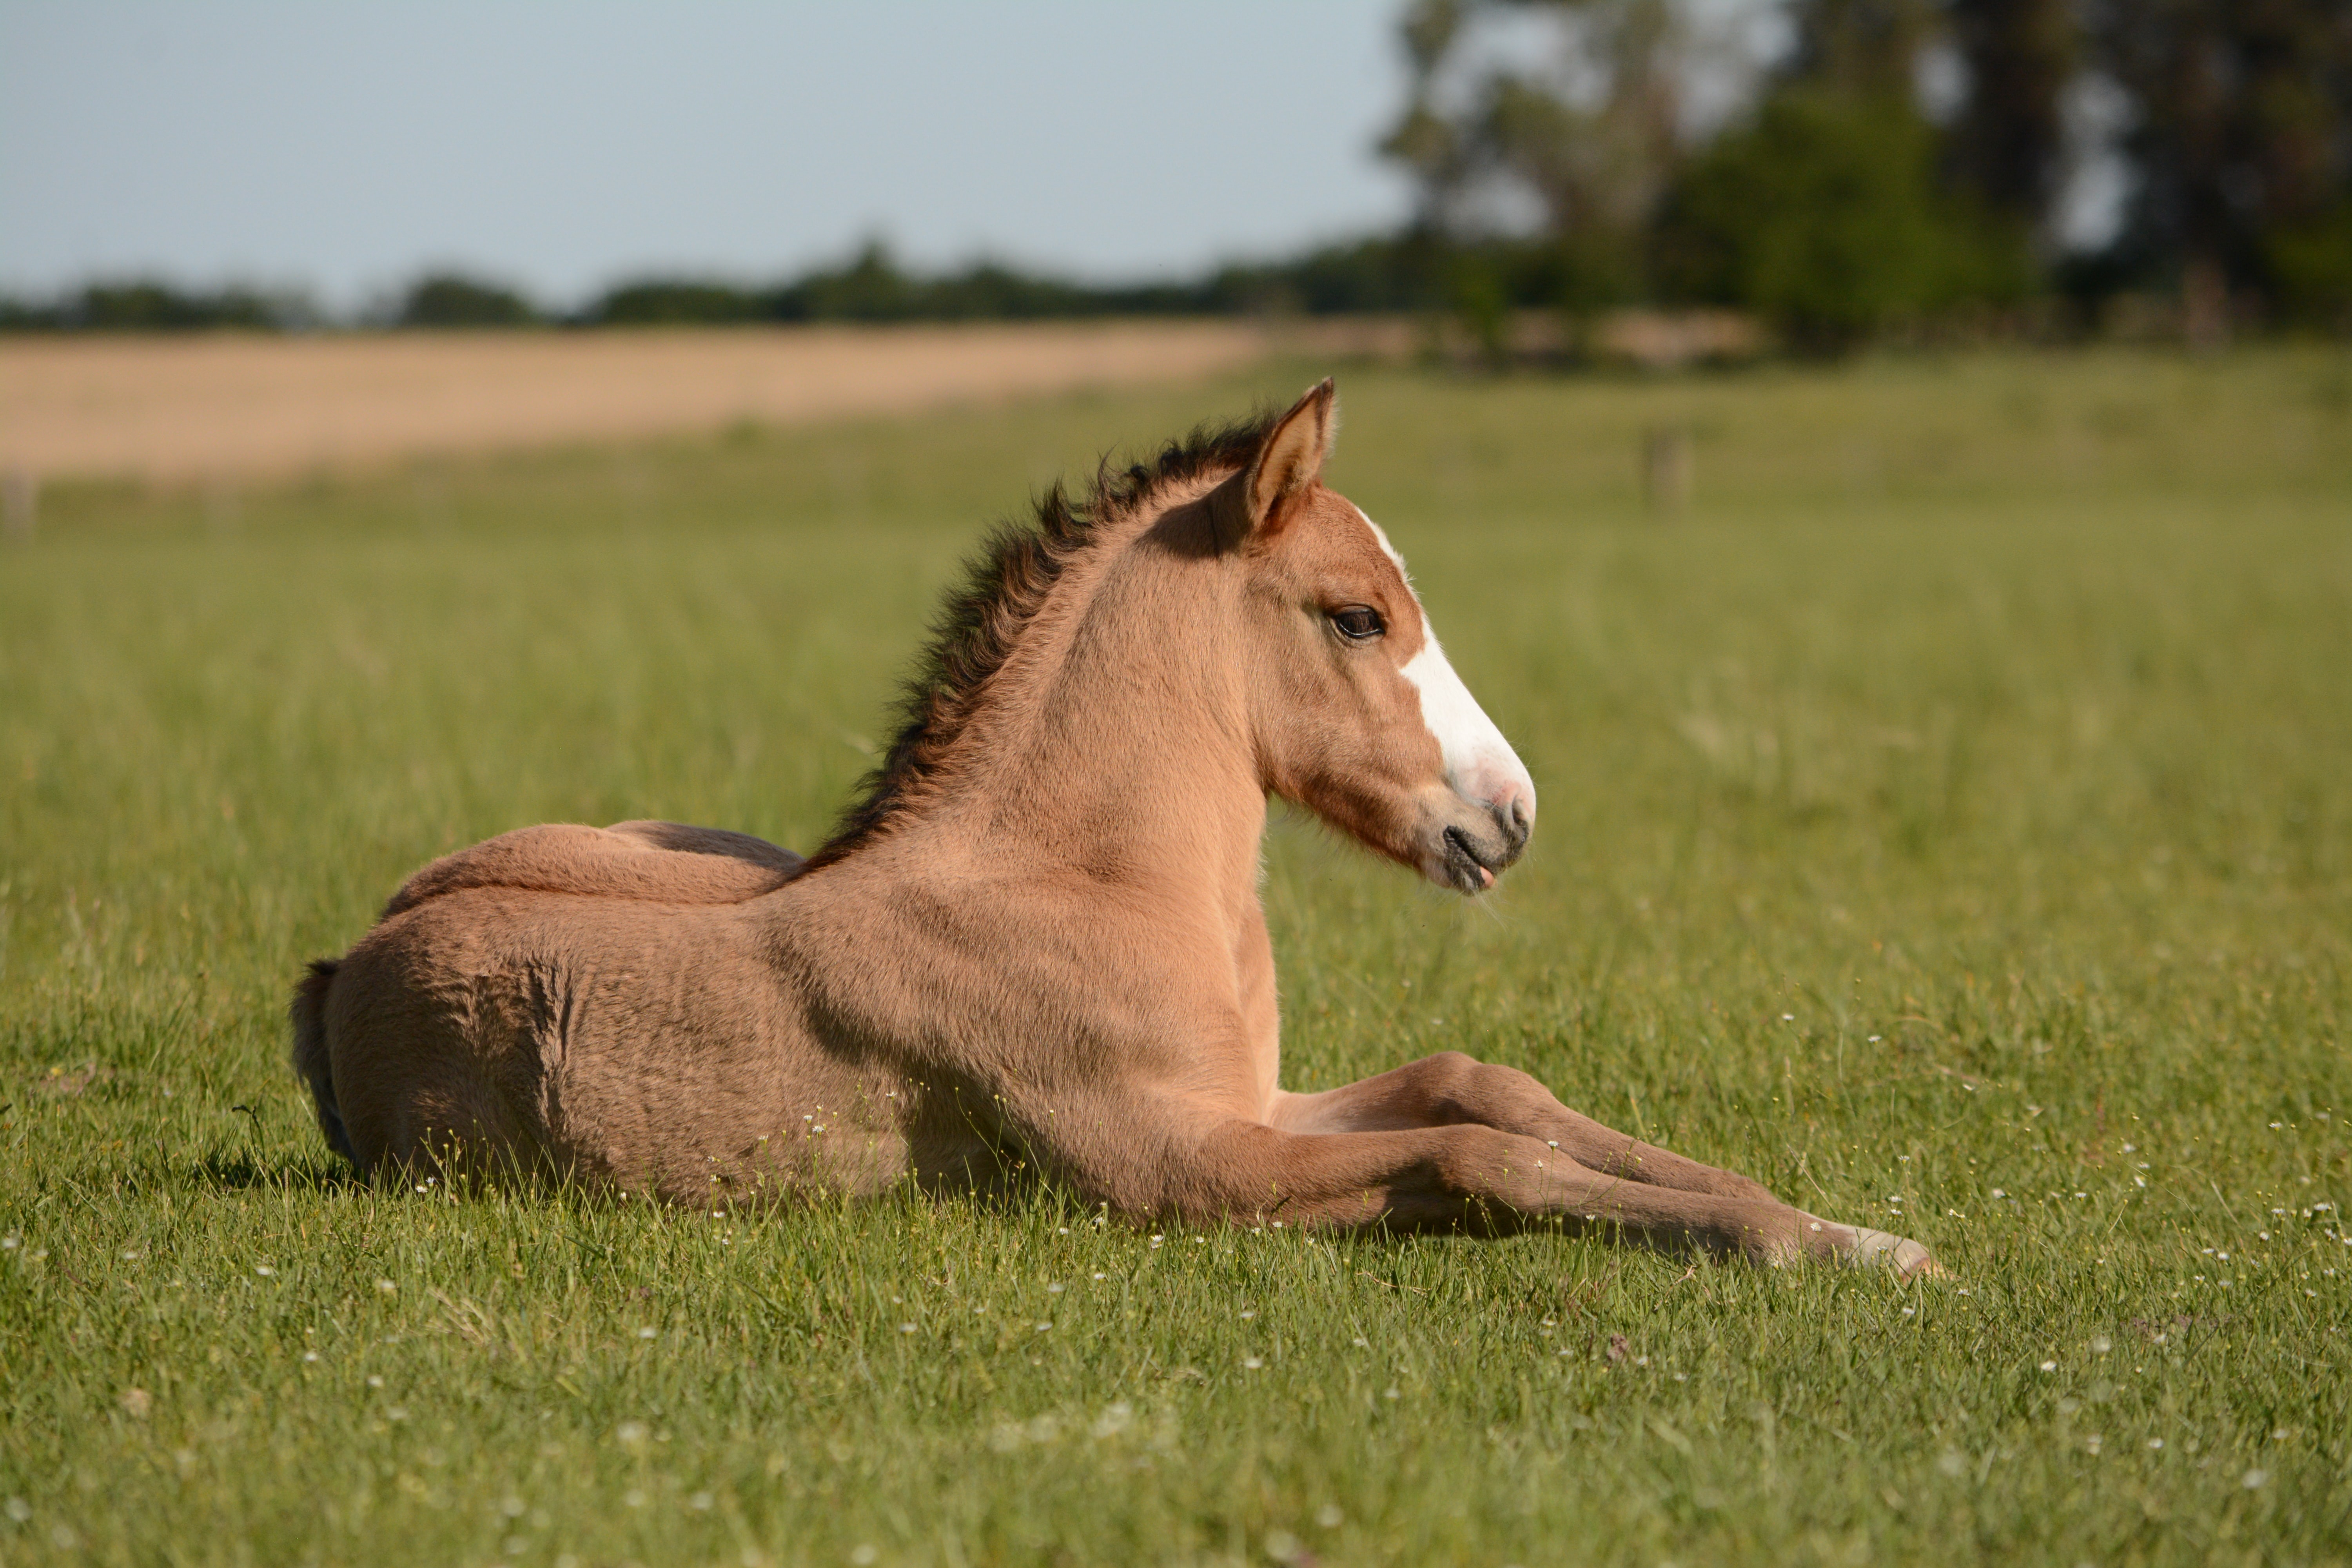 Small horse in grass 